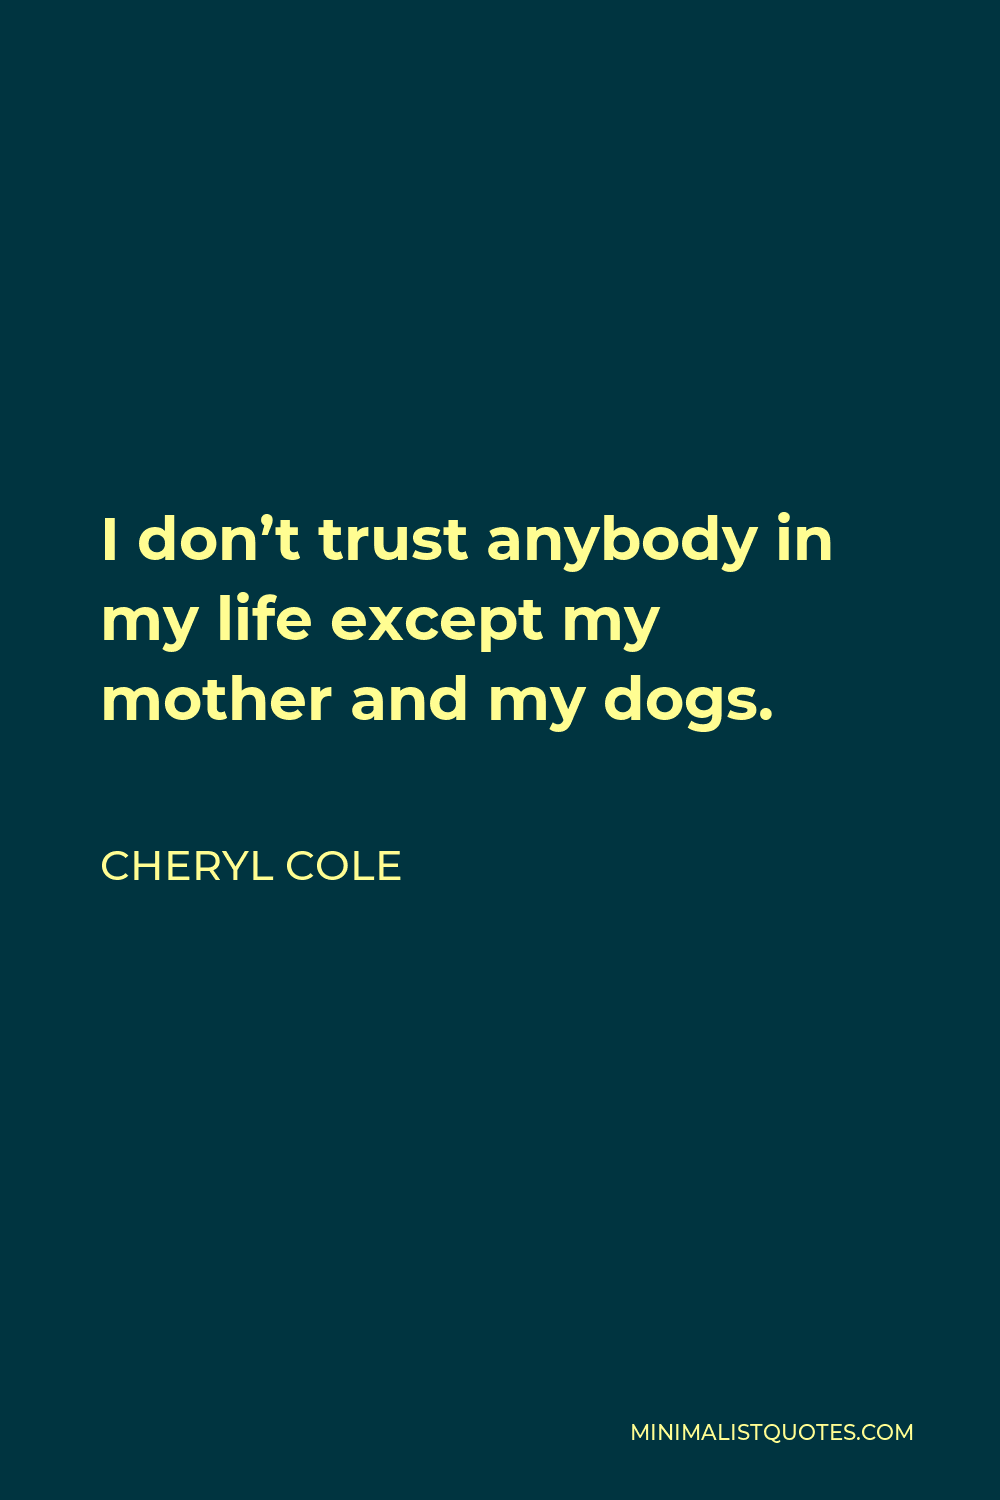 Cheryl Cole Quote: I don't trust anybody in my life except my ...